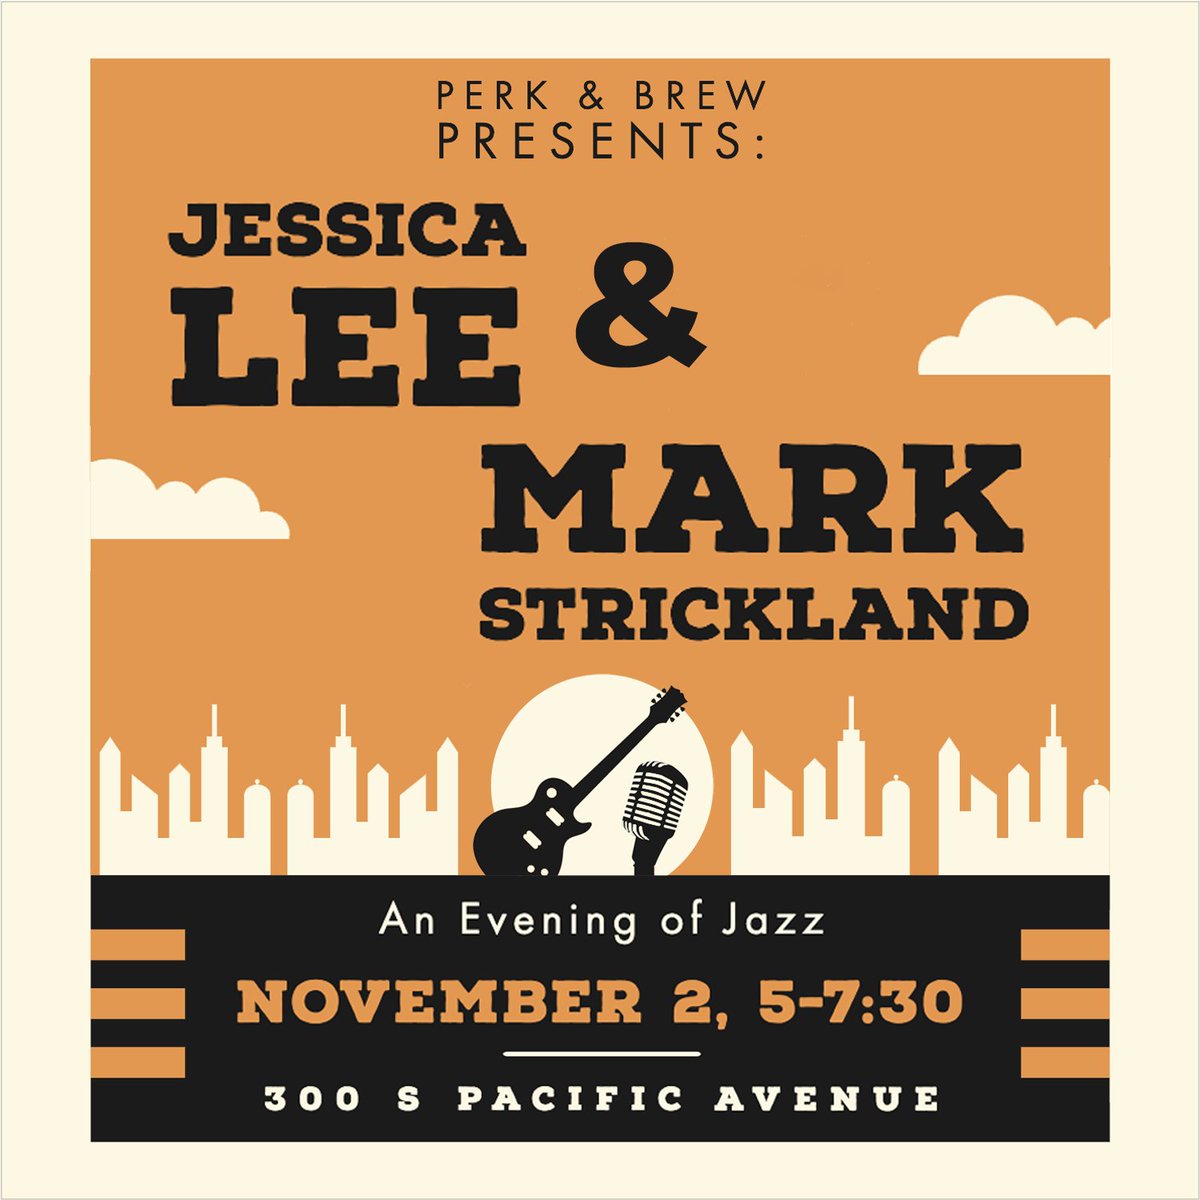 Tonight! 5-7:30
Jessica’s performances invoke the up-lifting energy and power  of early gospel, blues, jazz and soul. Mark Strickland is influenced by Wes Montgomery, Kenny Burrell, Joe Pass and Jazz and R&B legends.

#perkandbrew #pittsburghjazz #pghevents #pittsburghevents